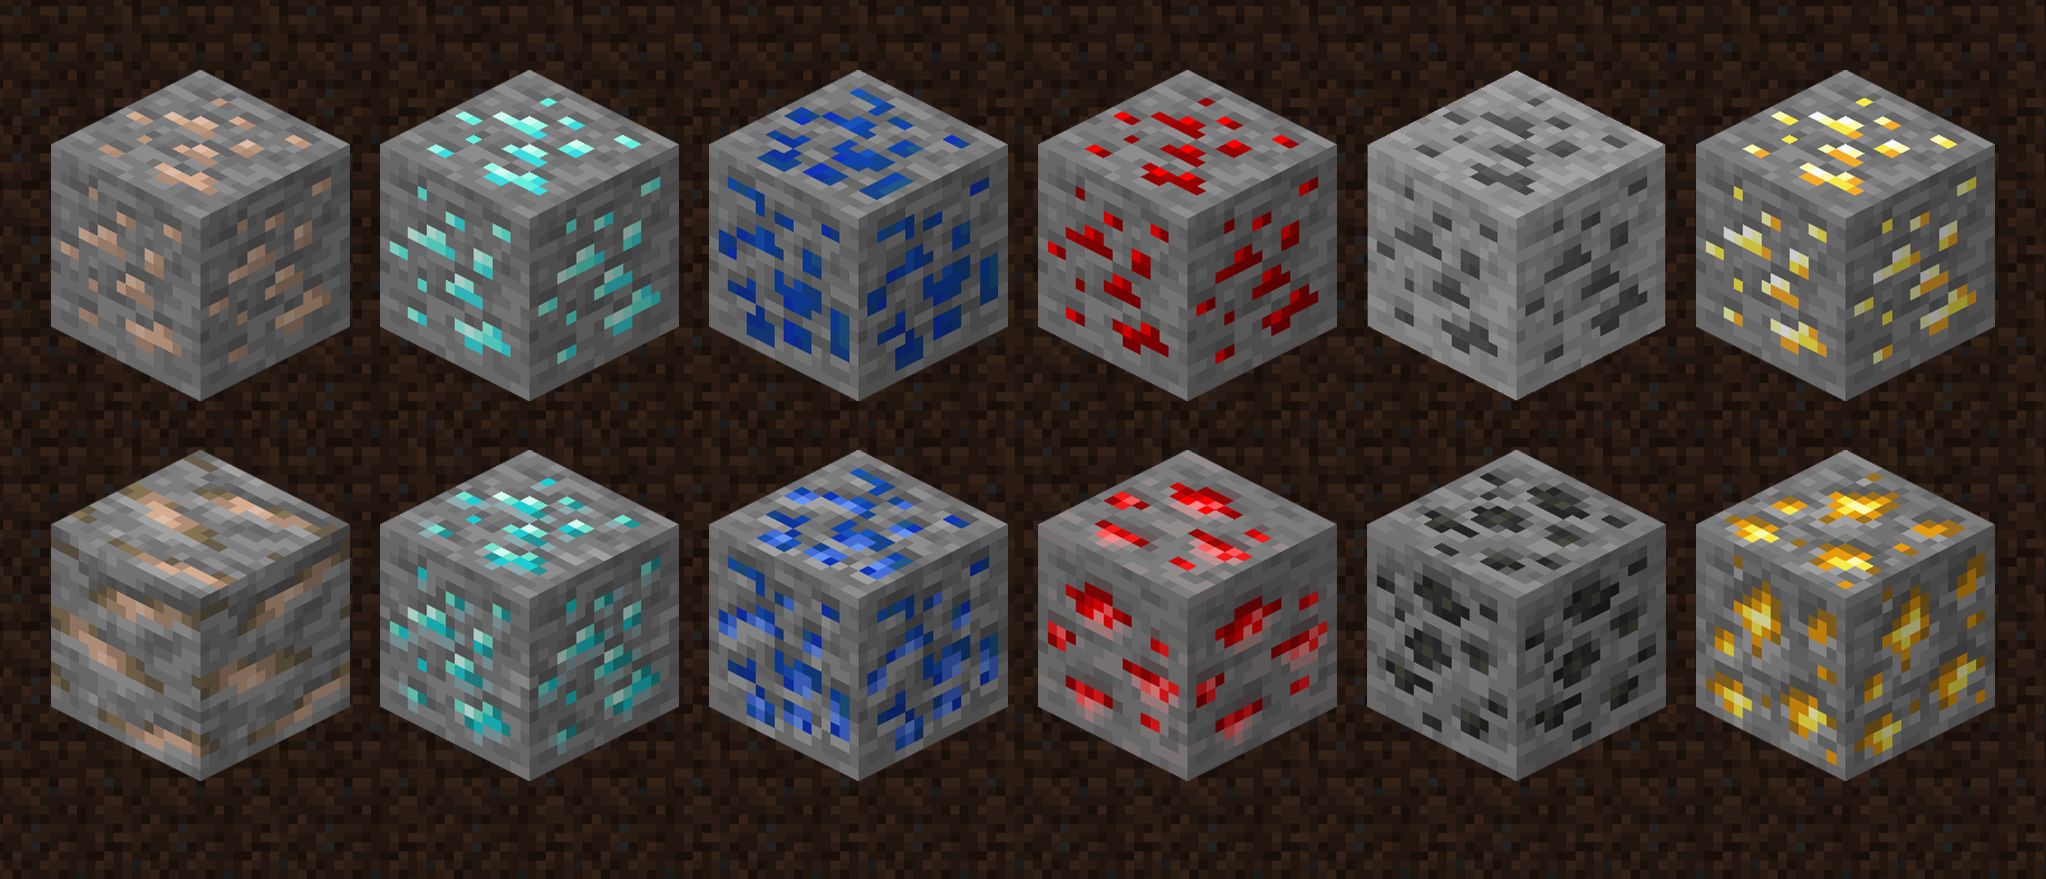 Above is an image of the old ore textures compared to the new textures that...